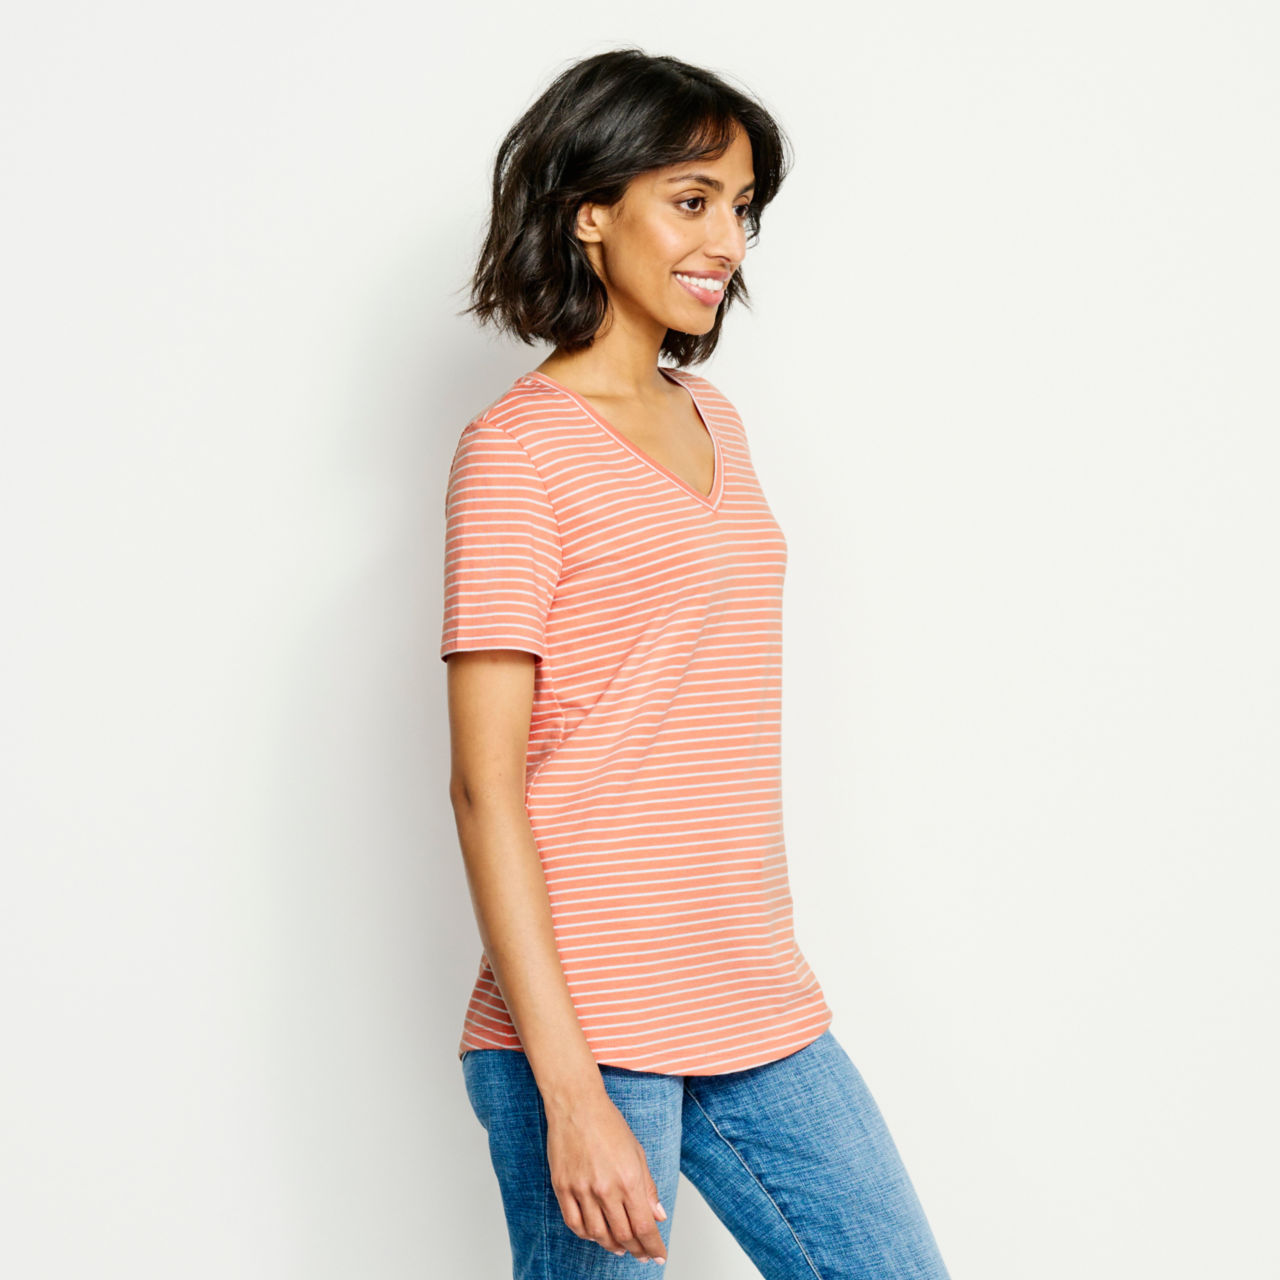 Perfect Relaxed V-Neck Short-Sleeved Tee - BLUE MOON MINI STRIPE image number 2